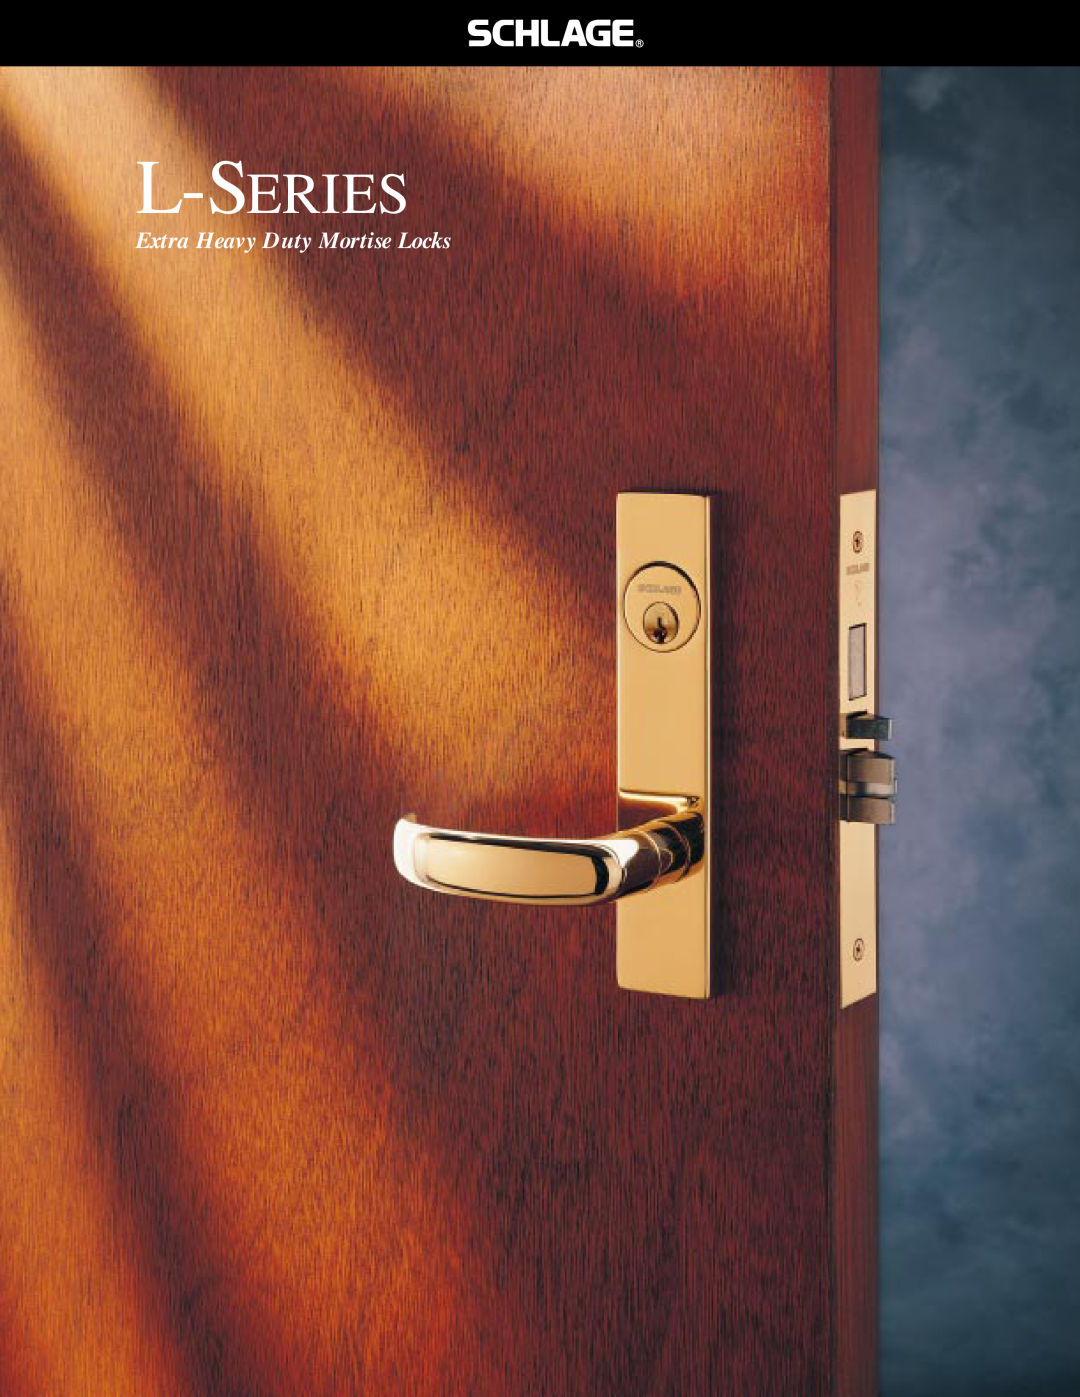 Schlage L-SERIES manual L-Series, Extra Heavy Duty Mortise Locks 